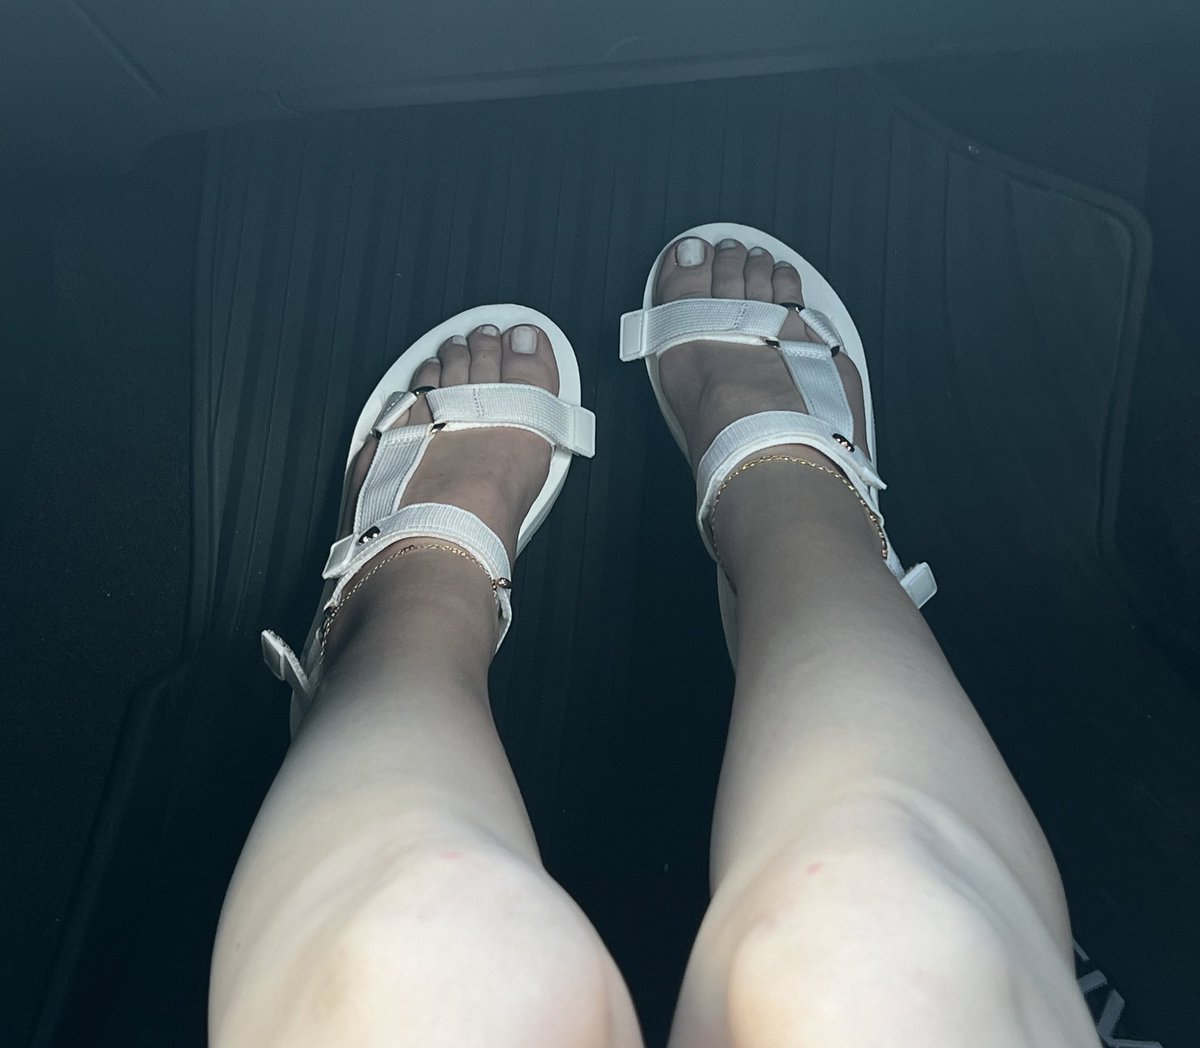 Some toes to brighten up your evening😊 Feet foot footfetish soles toes pedi nails paypig crypto btc